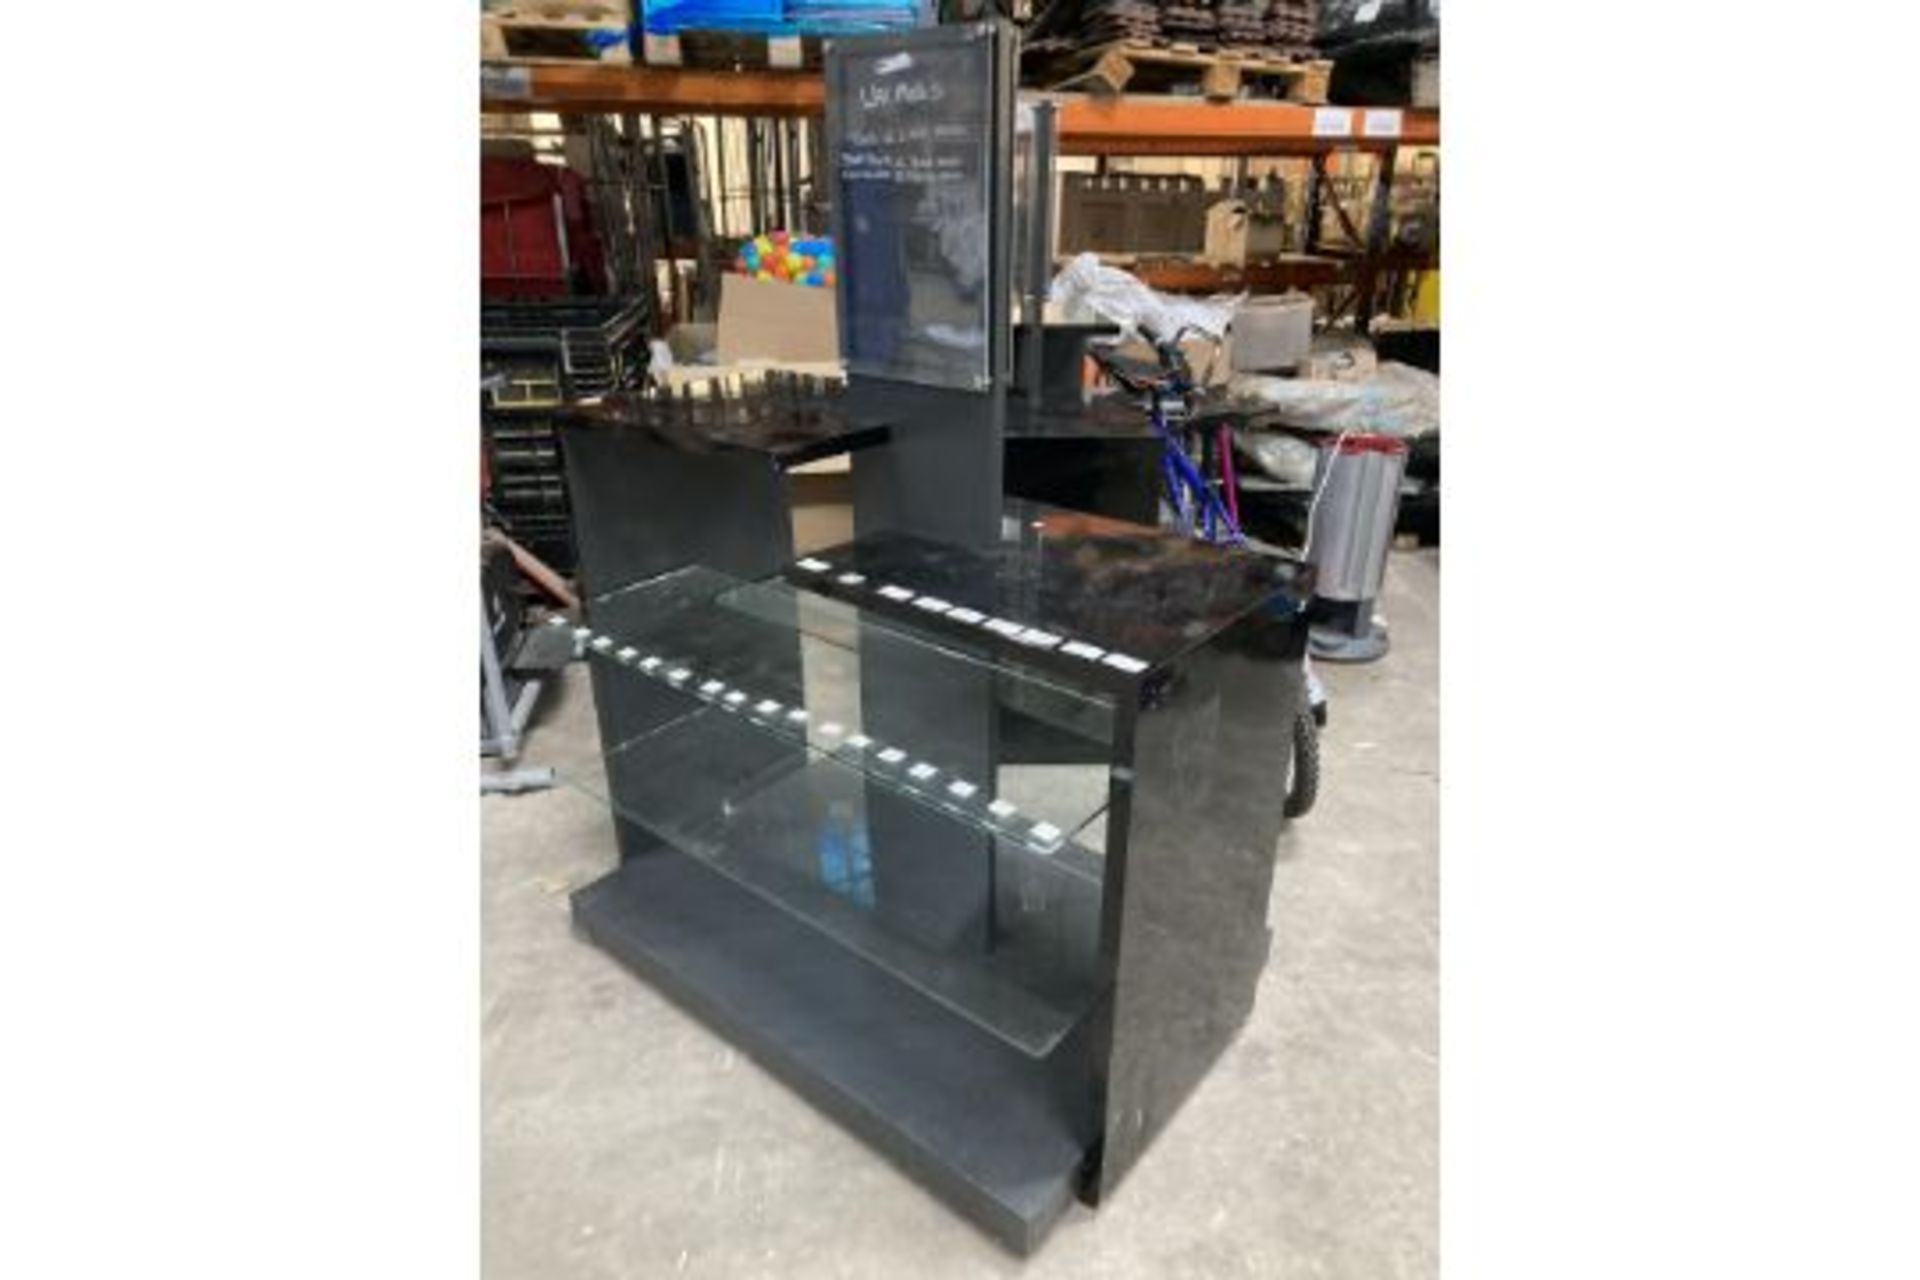 Black Display Stand W/ Glass Shelves - Image 2 of 5